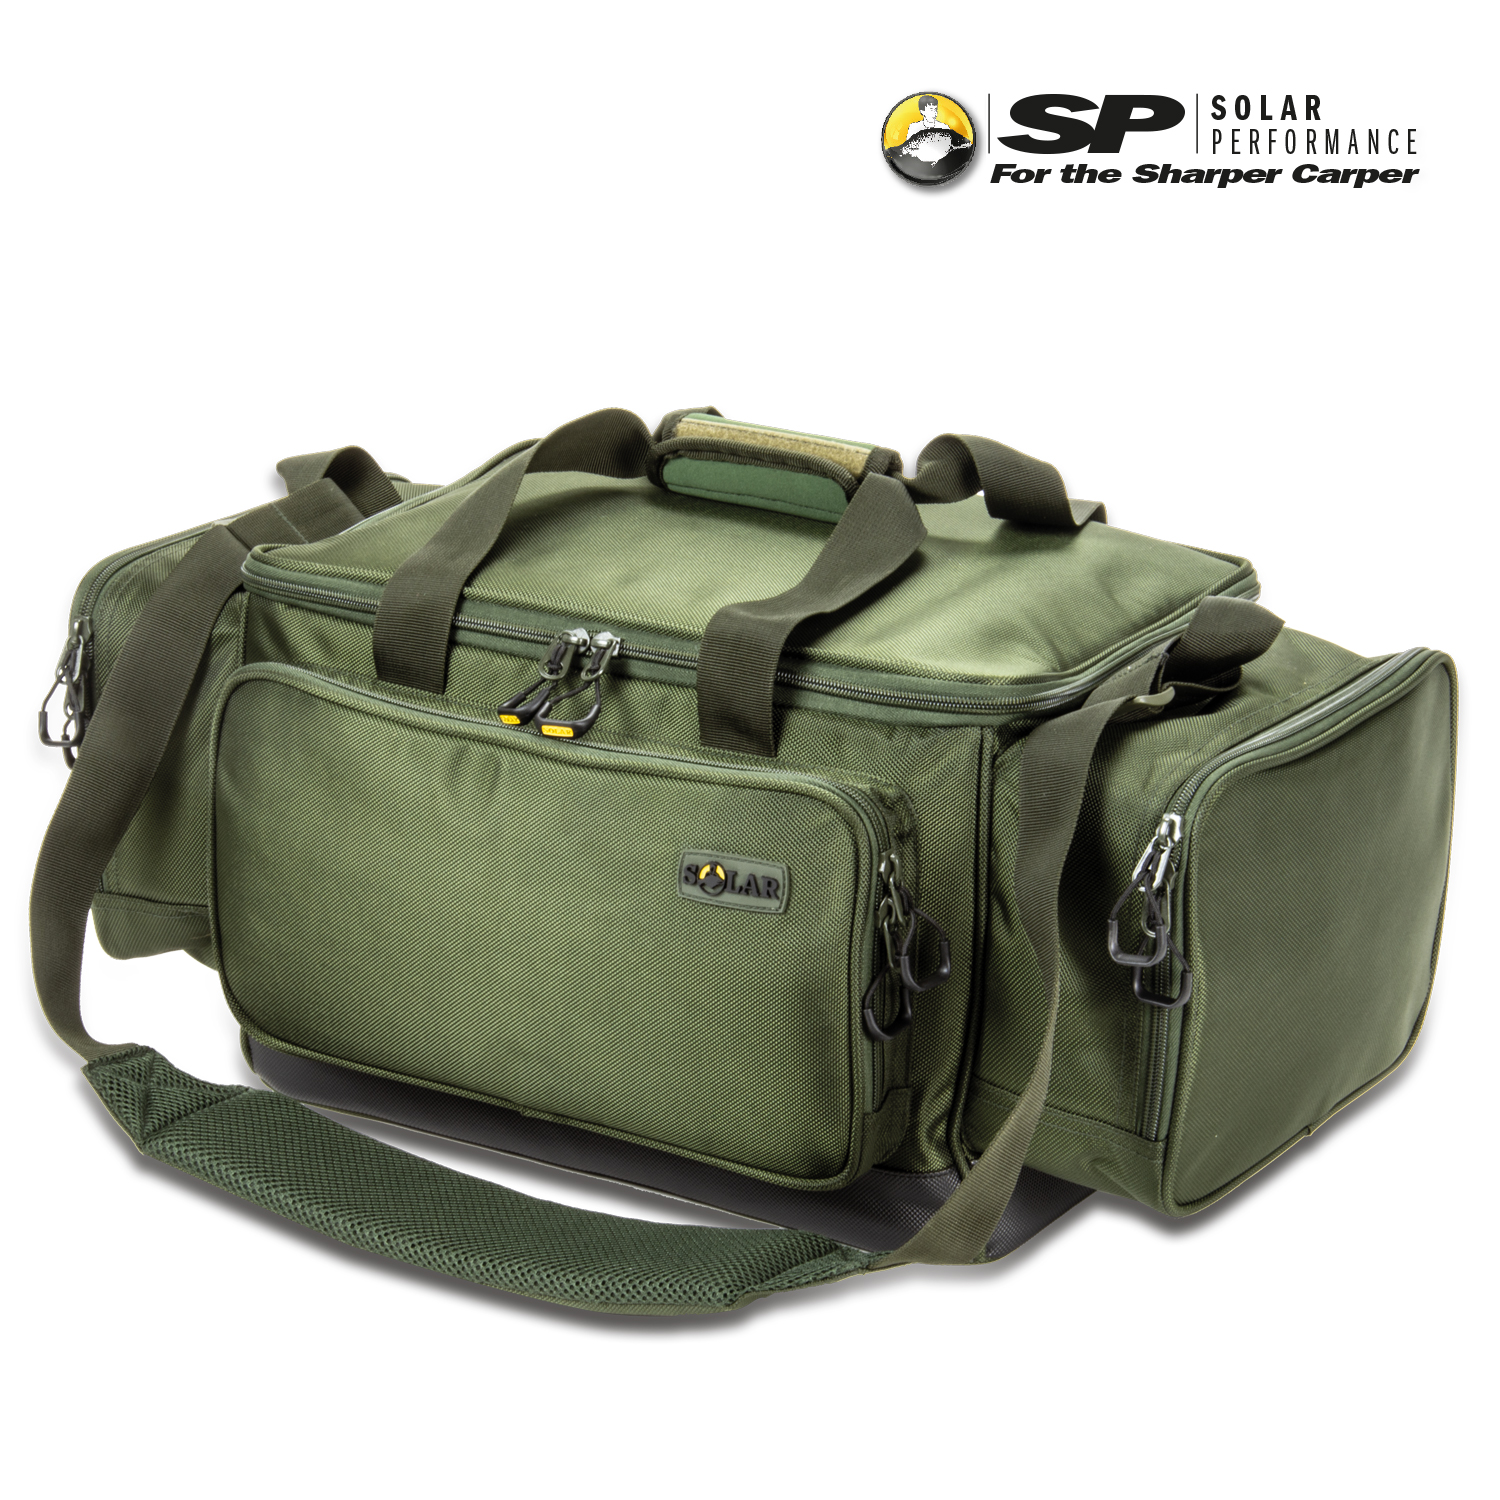 SP Luggage And Accessorys